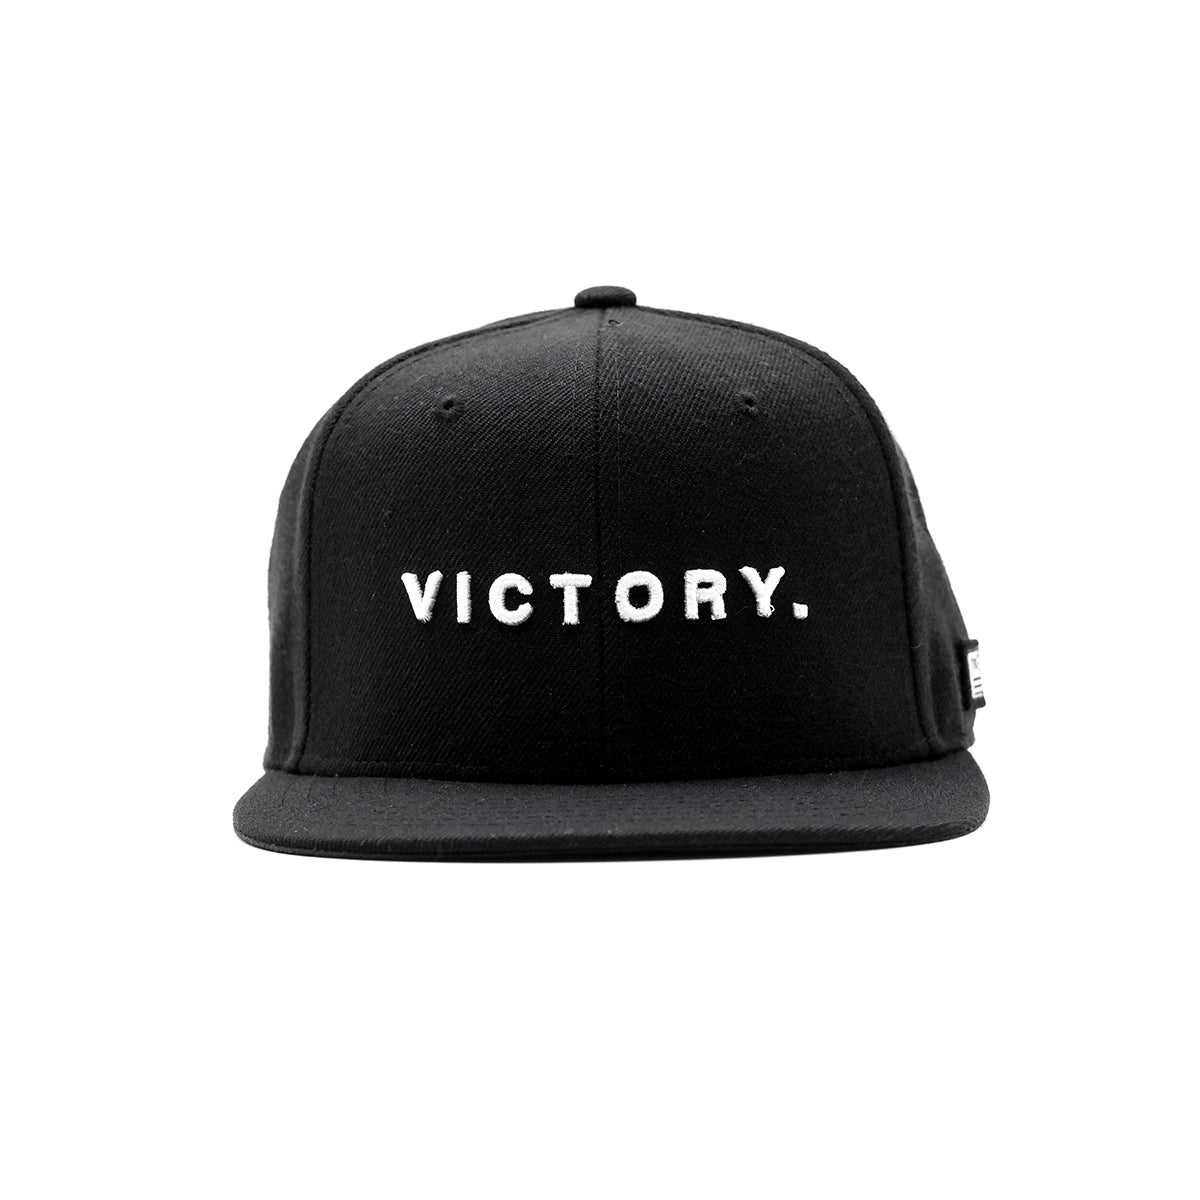 Victory Limited Edition Snapback - Black/White - Front